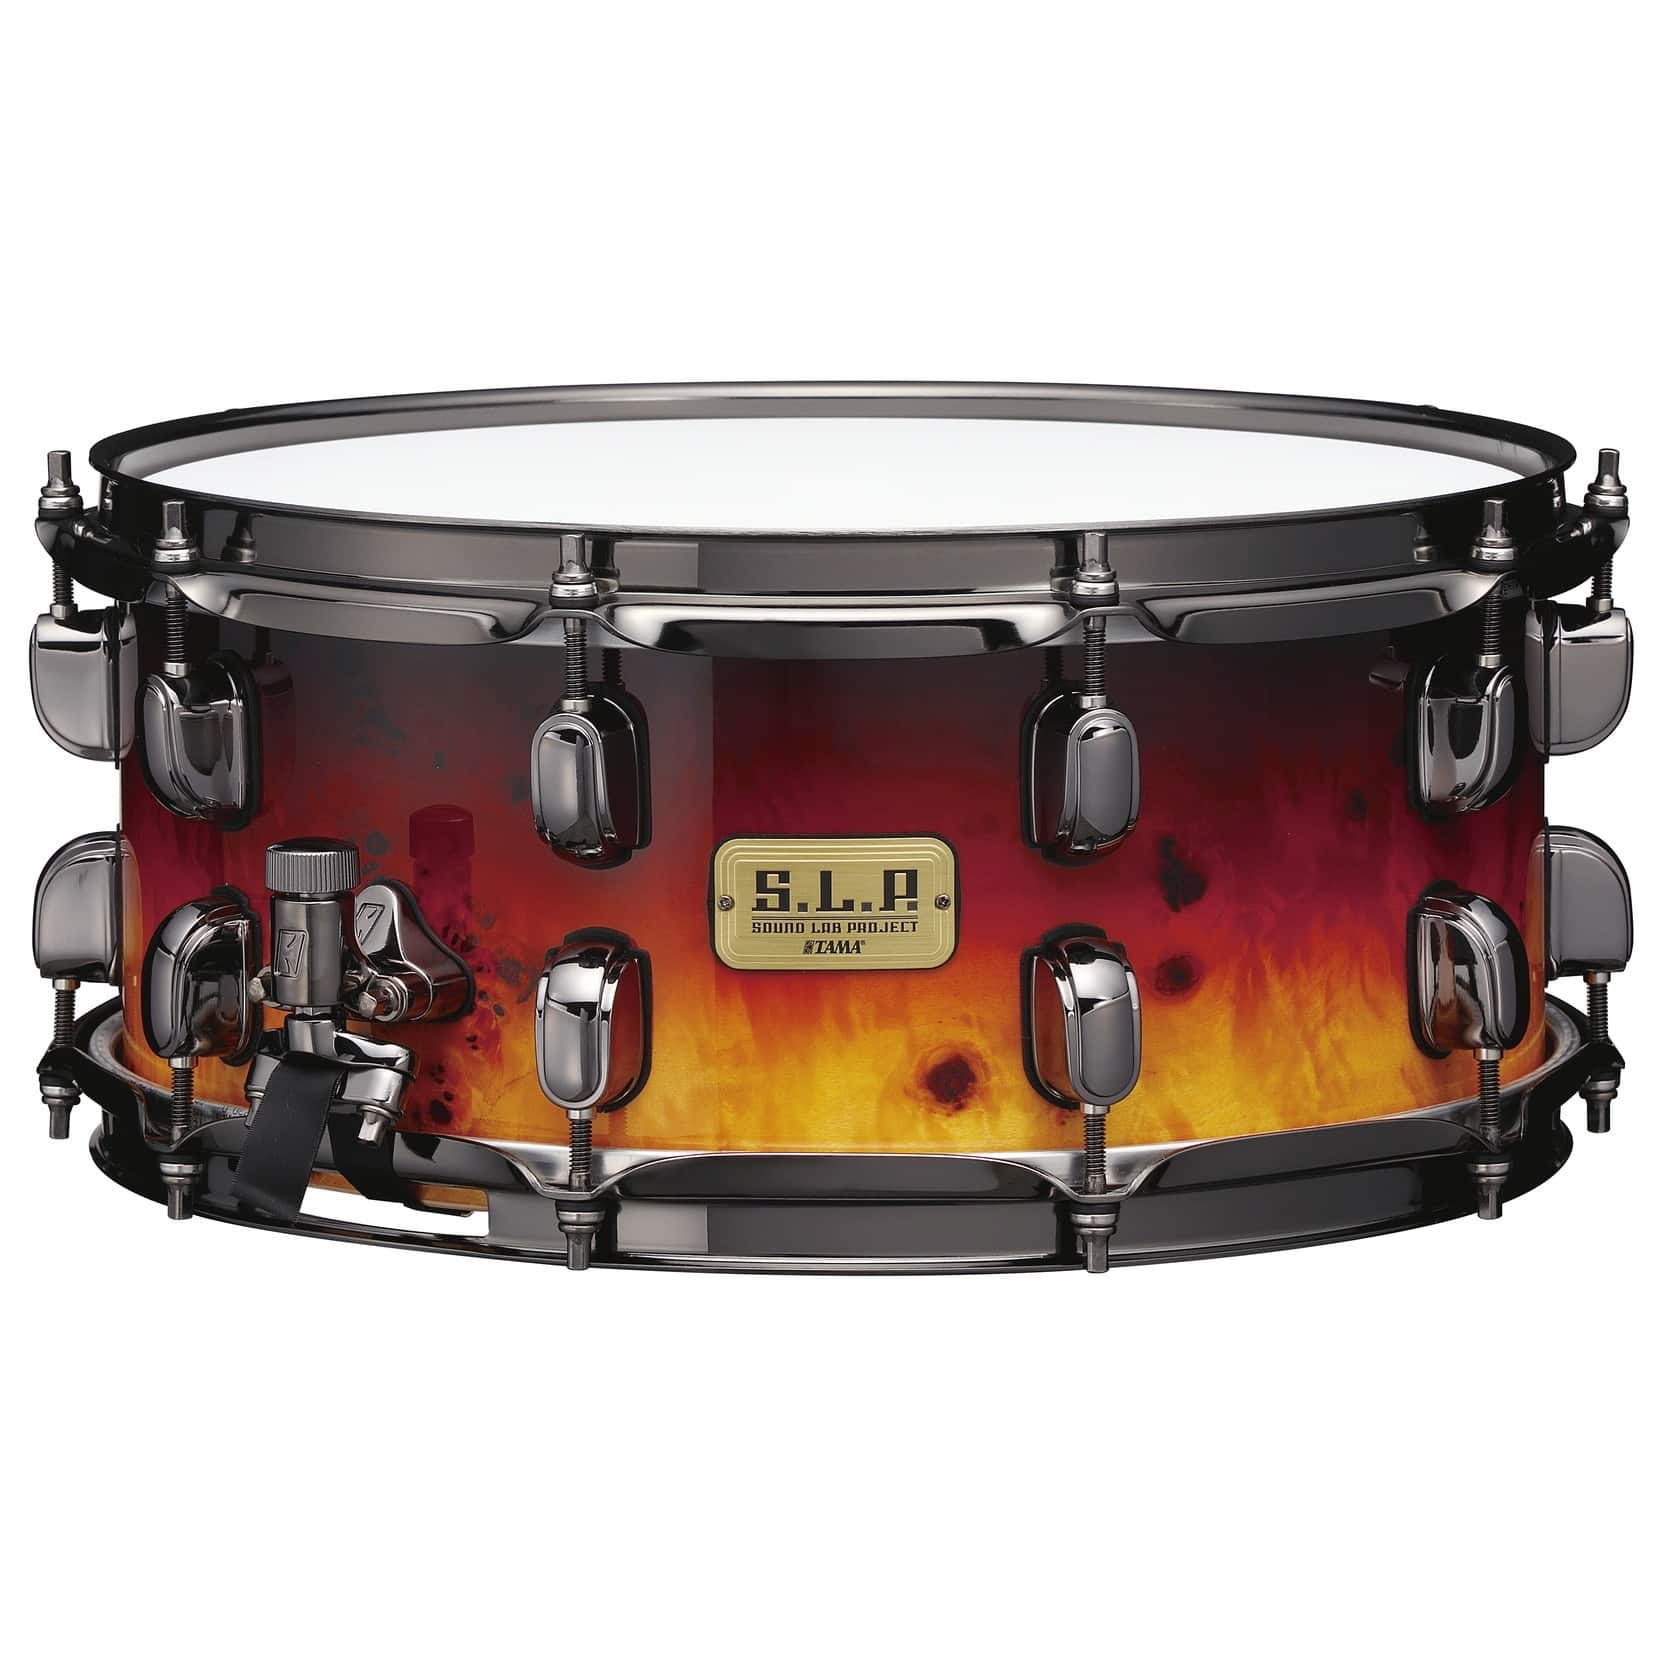 Tama LGK146-ASF Sound Lab Project Limited G-Kapur Snare Drum - 14" x 6" Amber Sunset Fade/Chrom HW